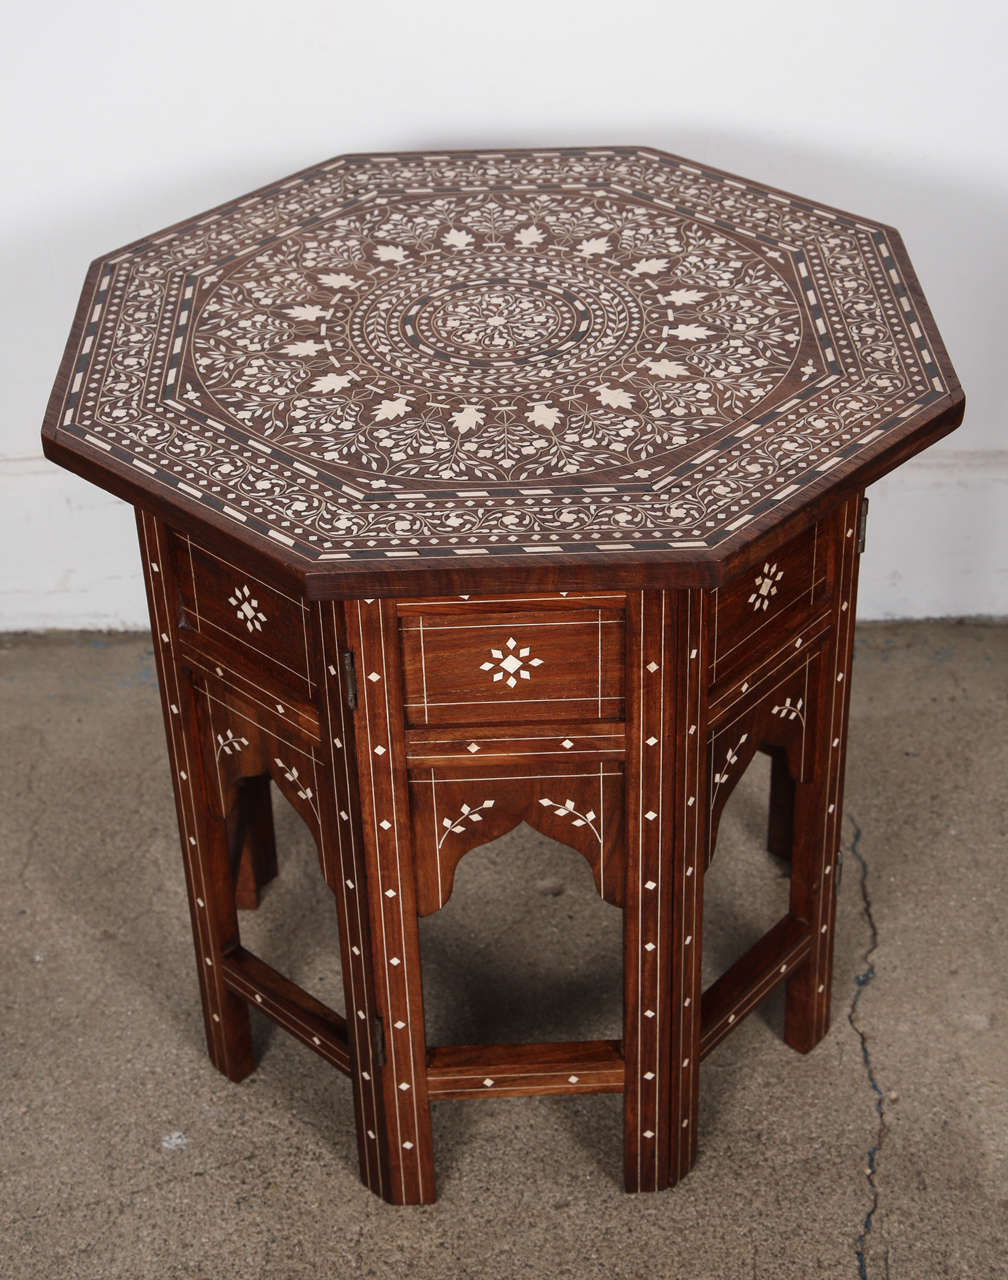 Anglo Indian folding Rosewood Ivory Inlaid Octagonal Side Table.
Fine and elegant Anglo-Indian octagonal rosewood table with elaborate bone inlay.The octagonal surface is finely carved and inlaid with bone details designs. The base fold flat.